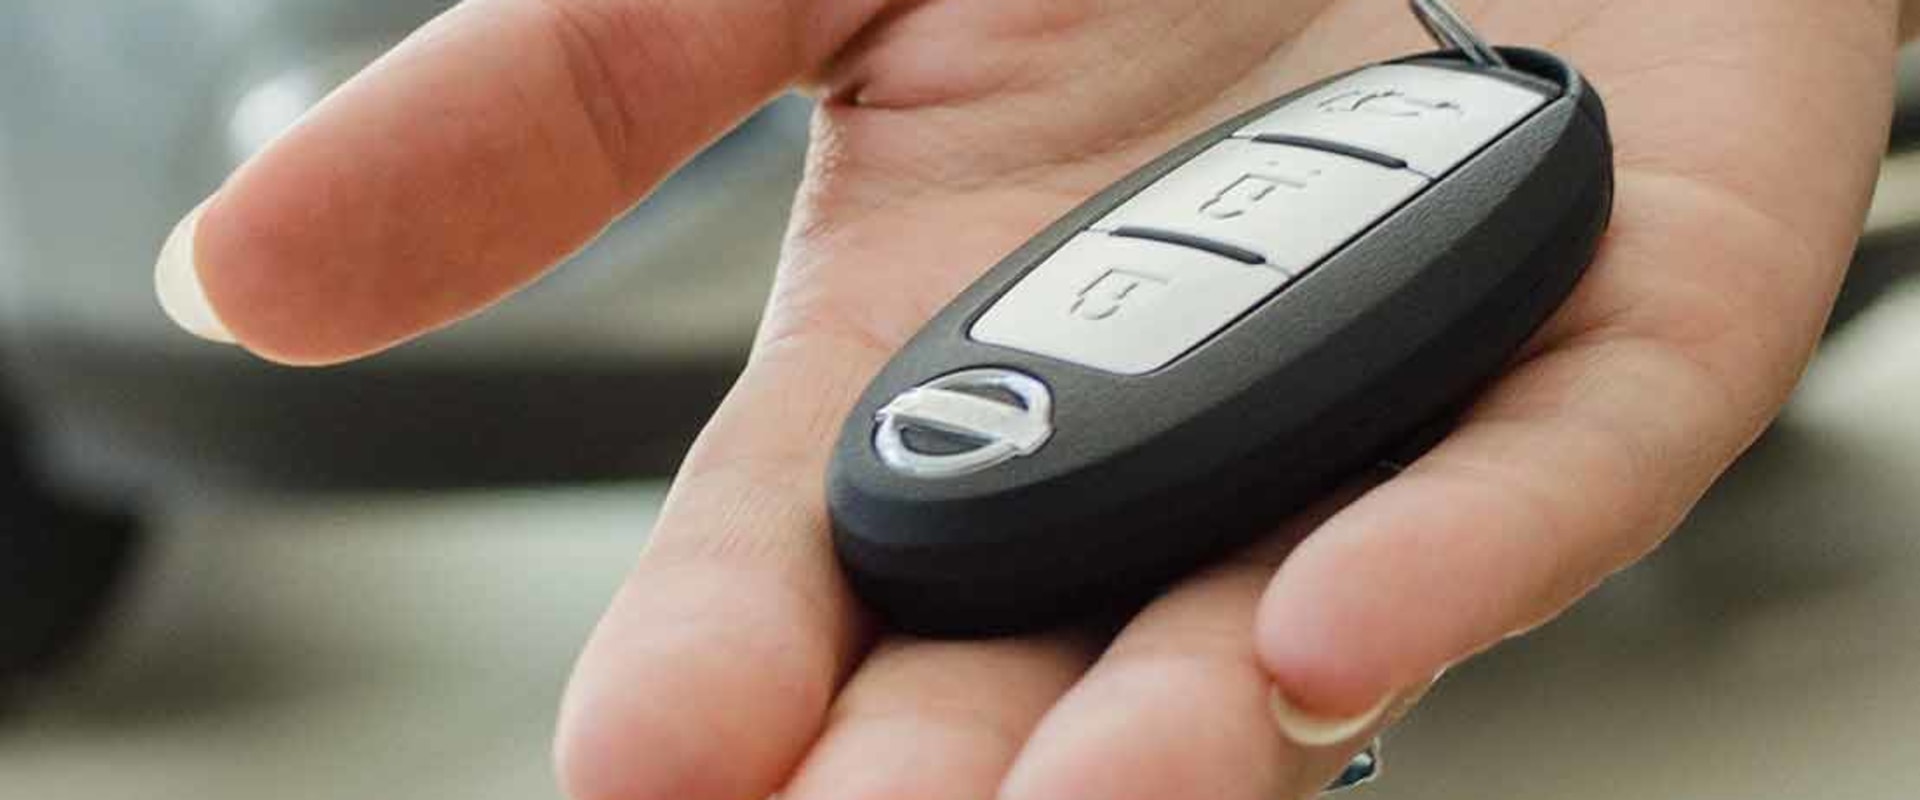 Remote Key Programming Services: What You Need to Know About Car Locksmiths in Spokane WA